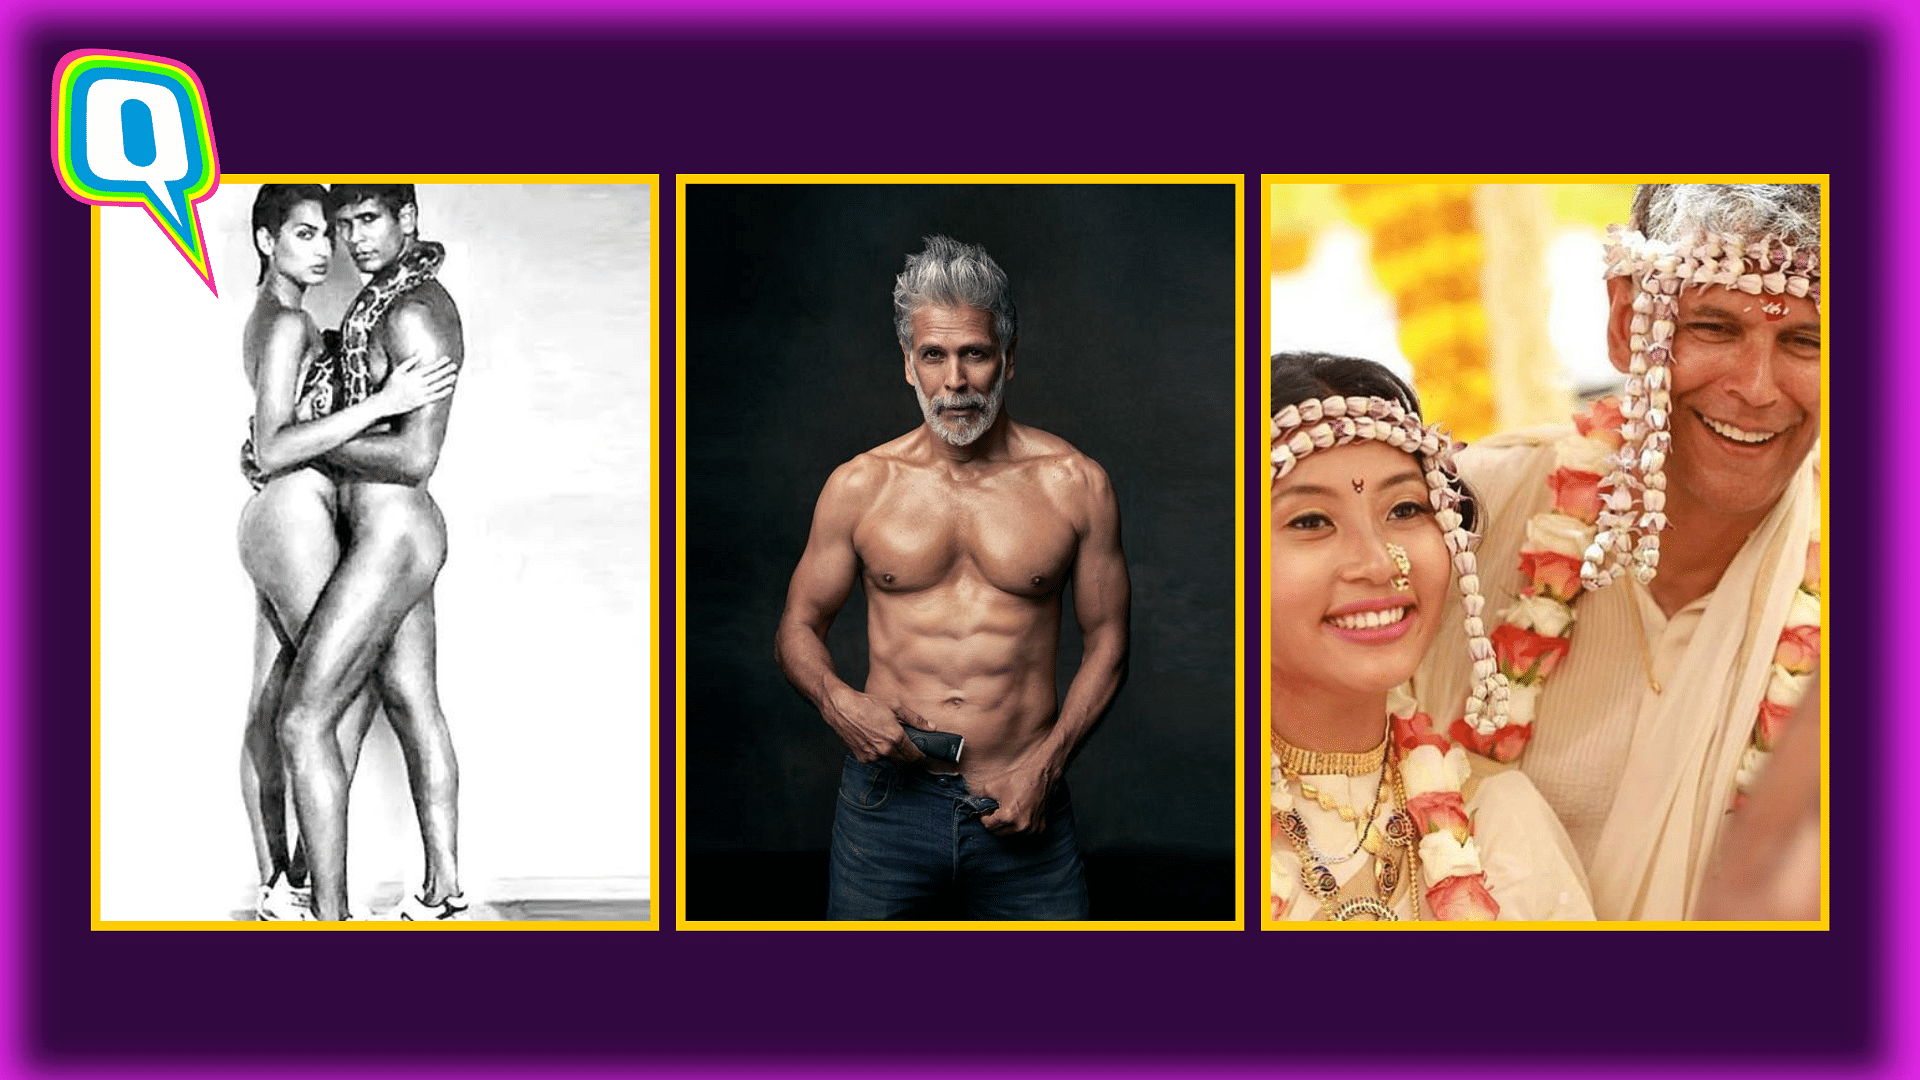 <div class="paragraphs"><p>From Posing Nude To Endorsing Vim Black; 4 Controversies Courted By Milind Soman</p></div>